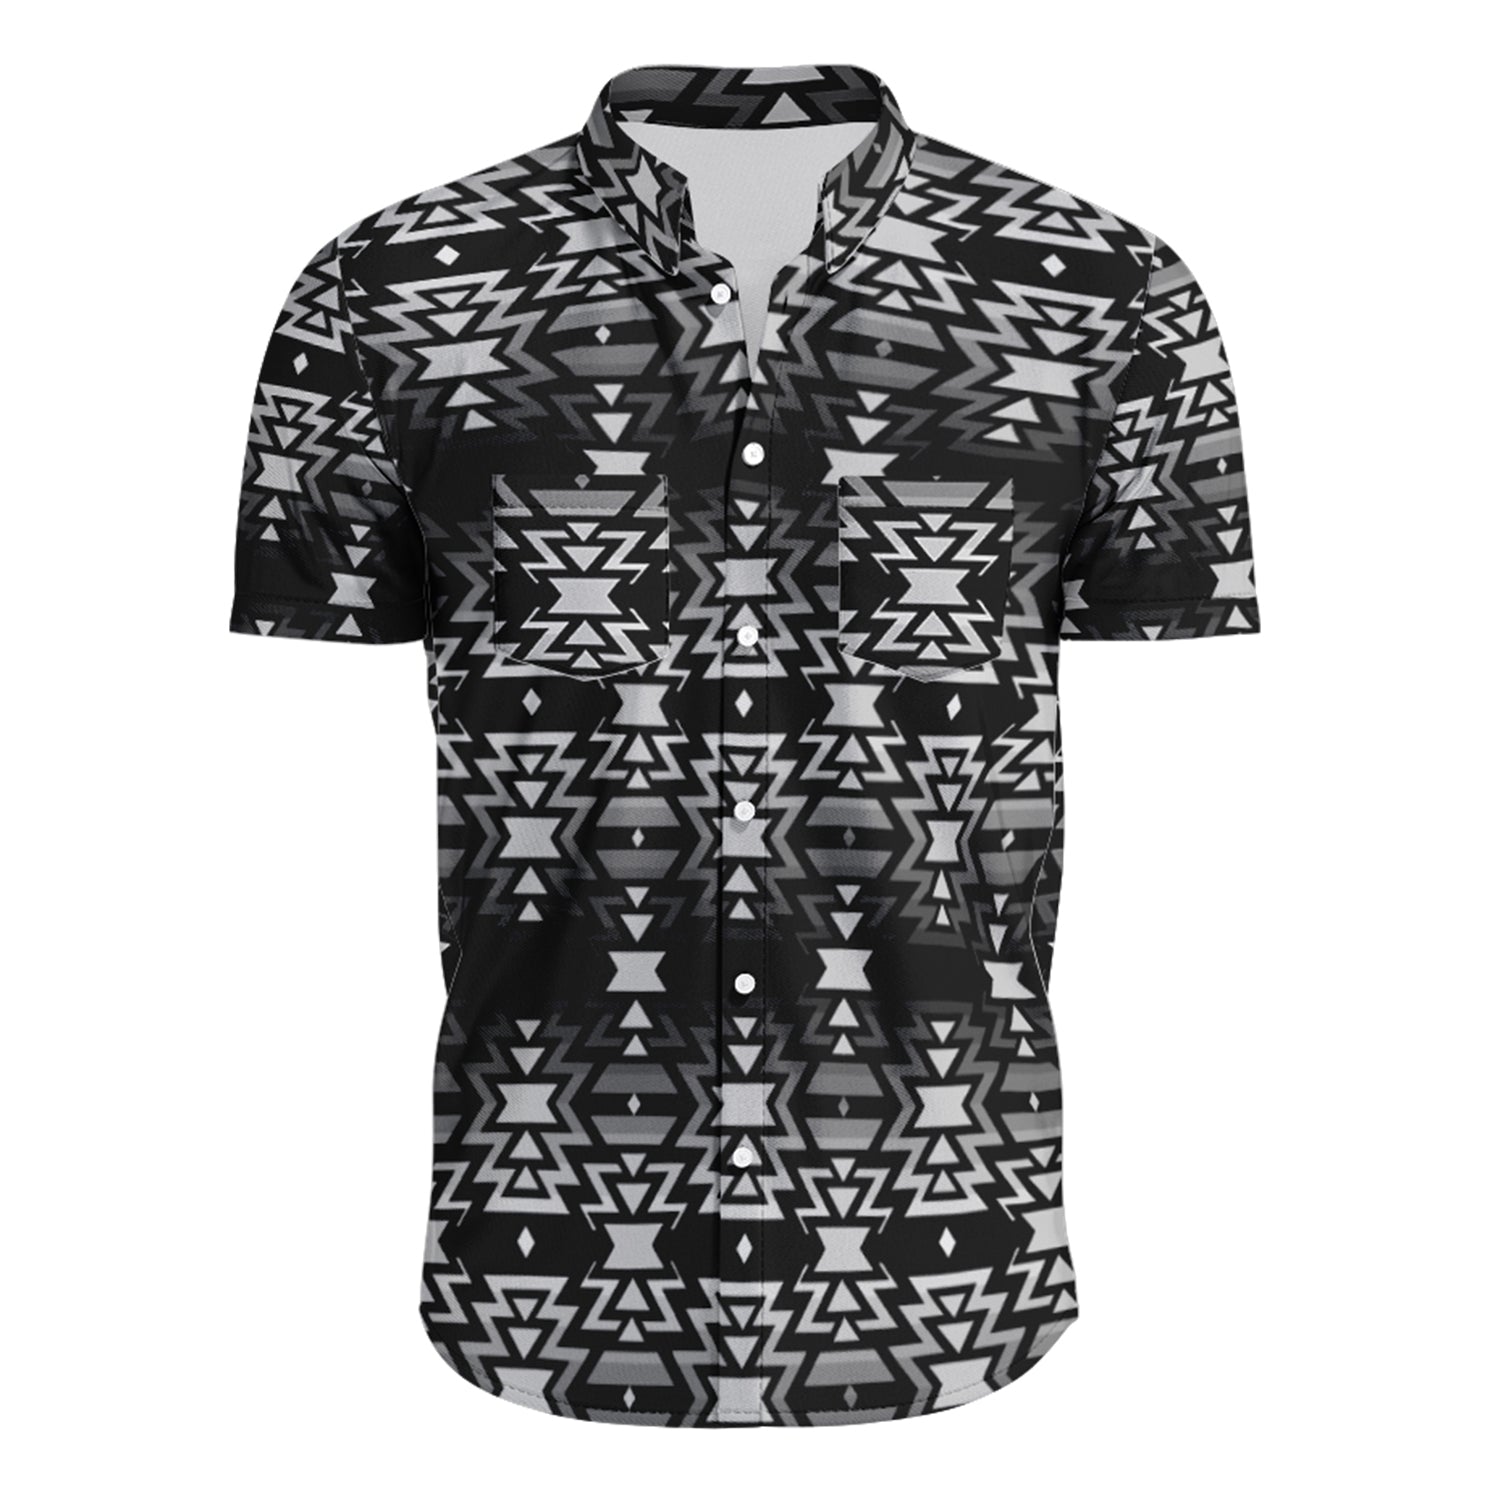 Black Fire Black and Gray Hawaiian-Style Button Up Shirt